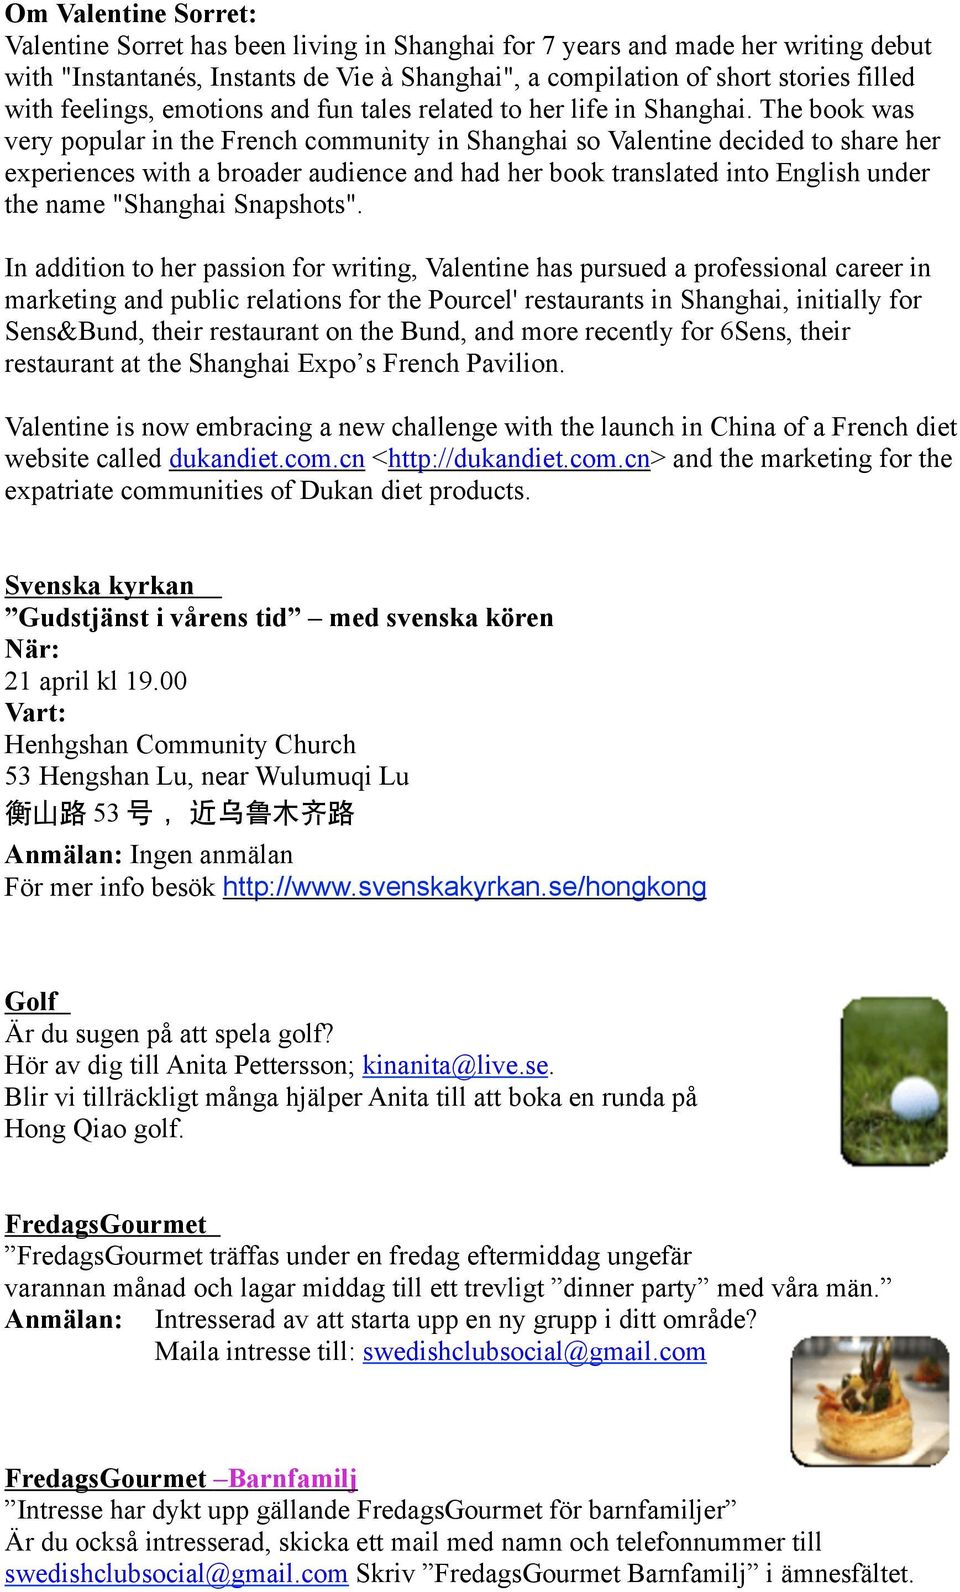 The book was very popular in the French community in Shanghai so Valentine decided to share her experiences with a broader audience and had her book translated into English under the name "Shanghai